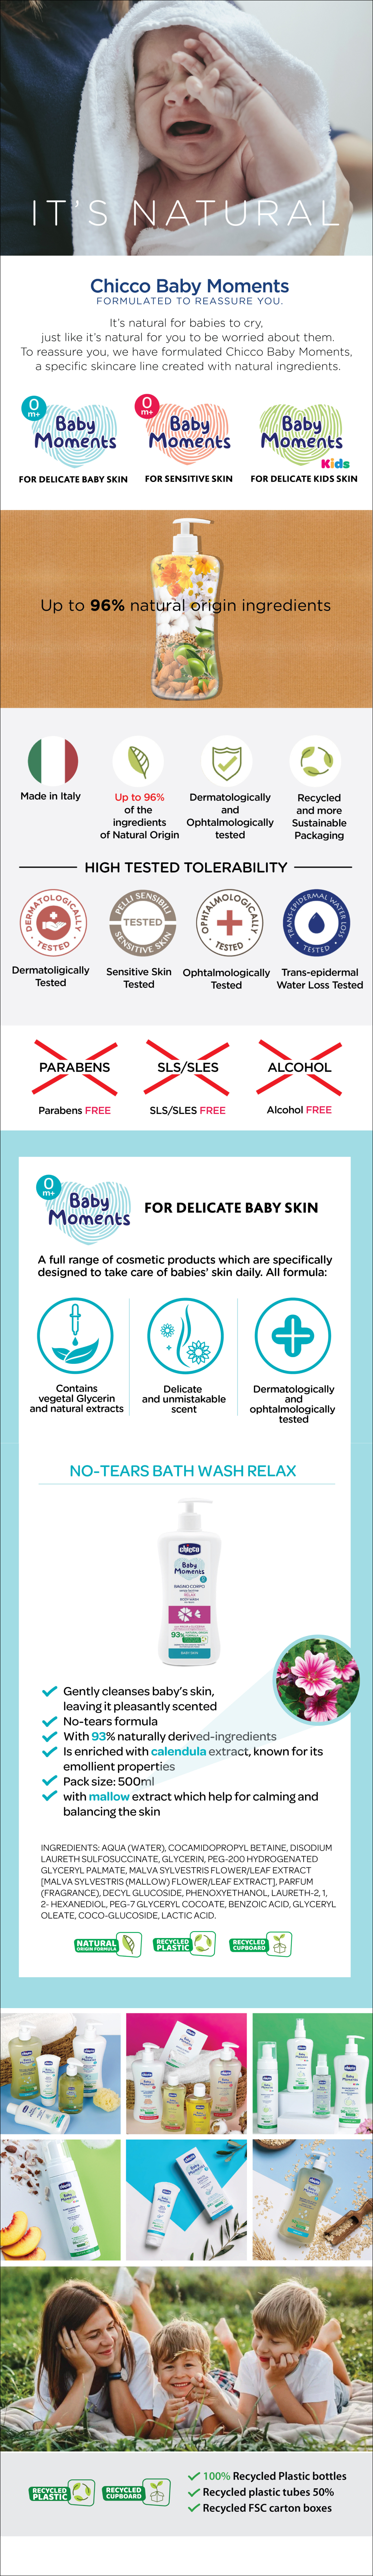 (Baby Skin) Chicco Baby Moments No-Tears Body Wash Relax